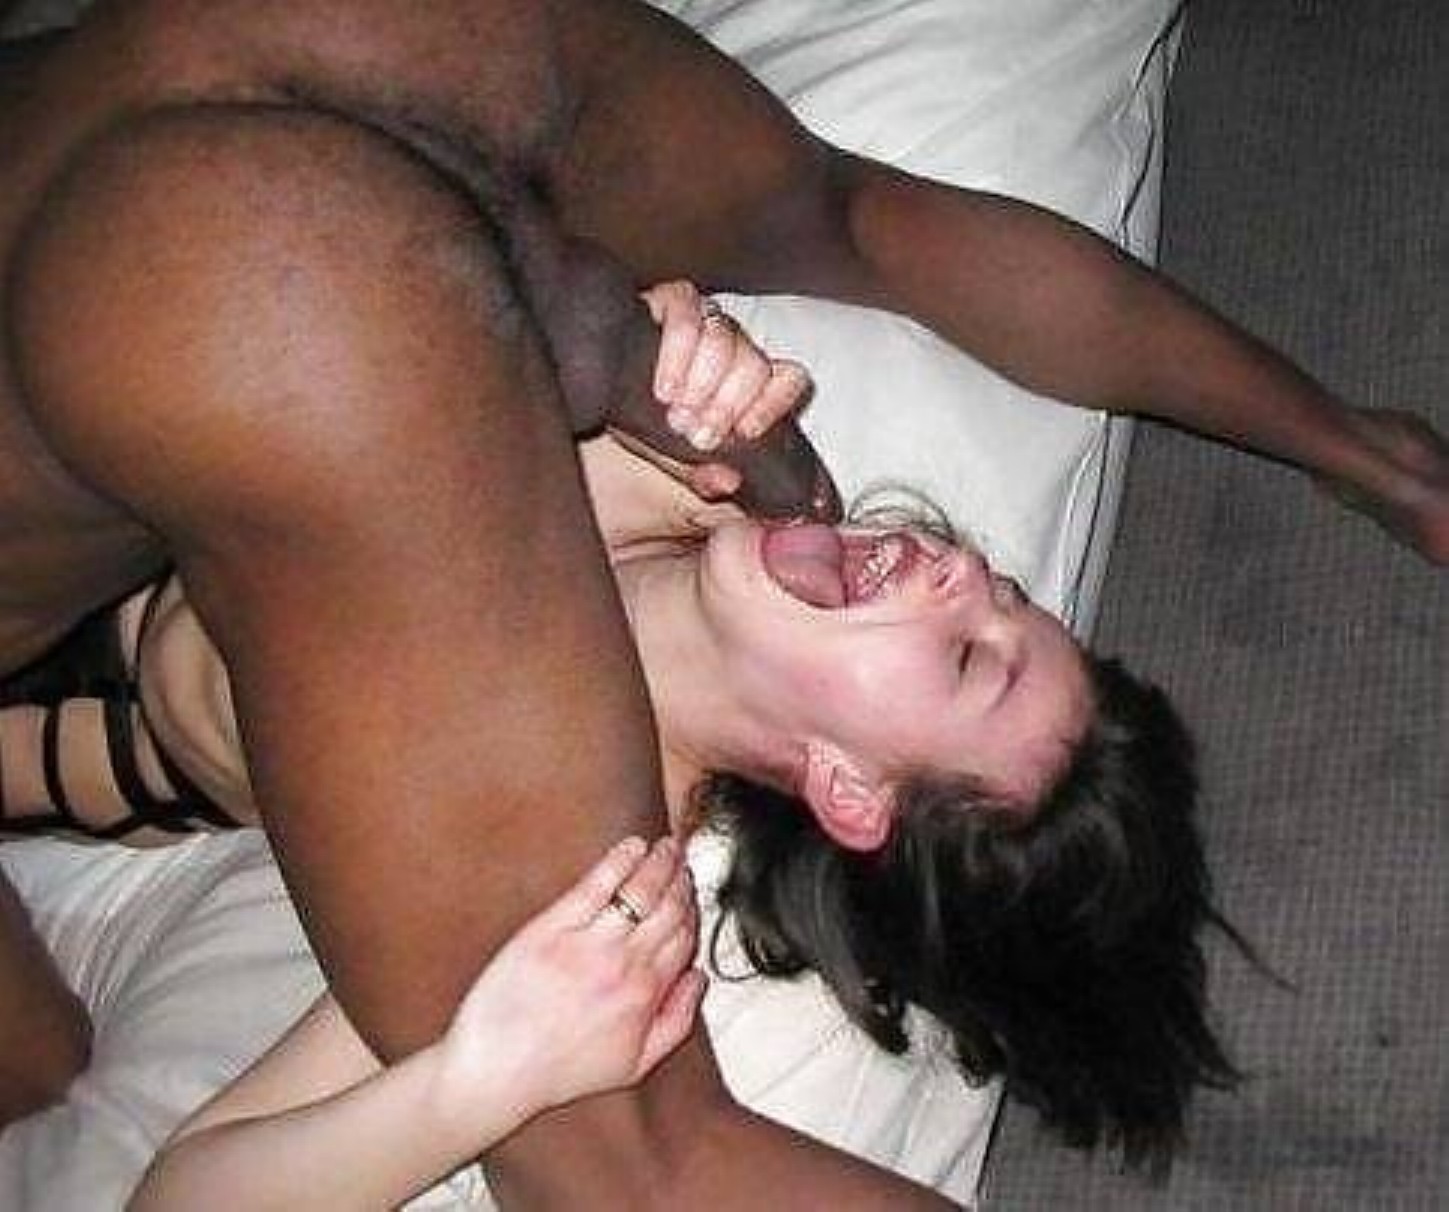 Interracial Lust Page 7 Xnxx Adult Forum